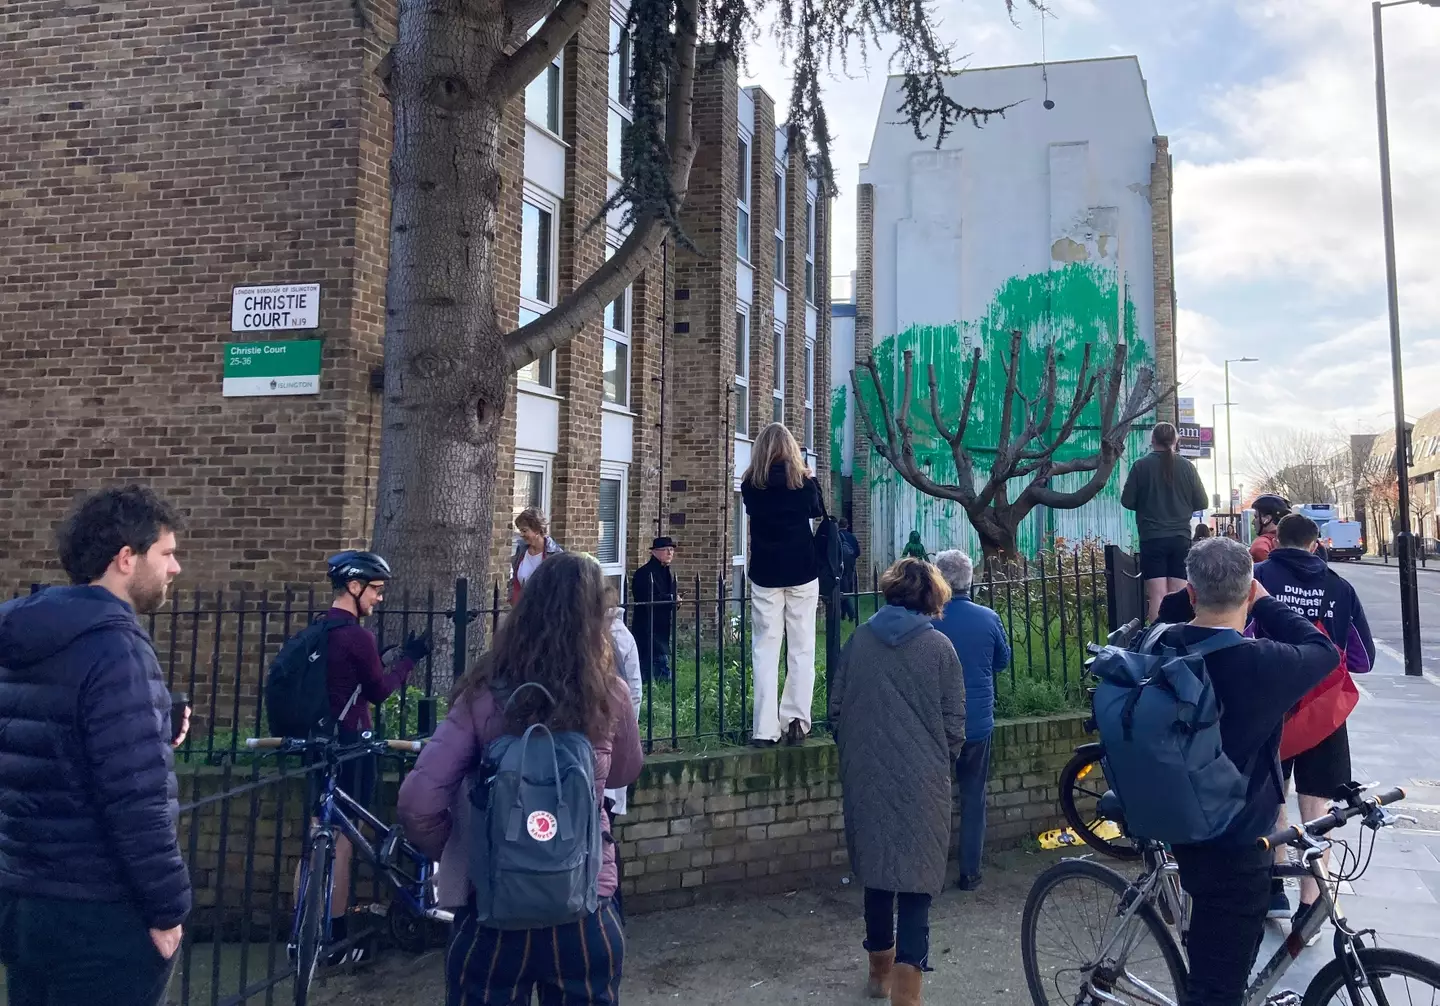 Locals have come to see the Banksy.